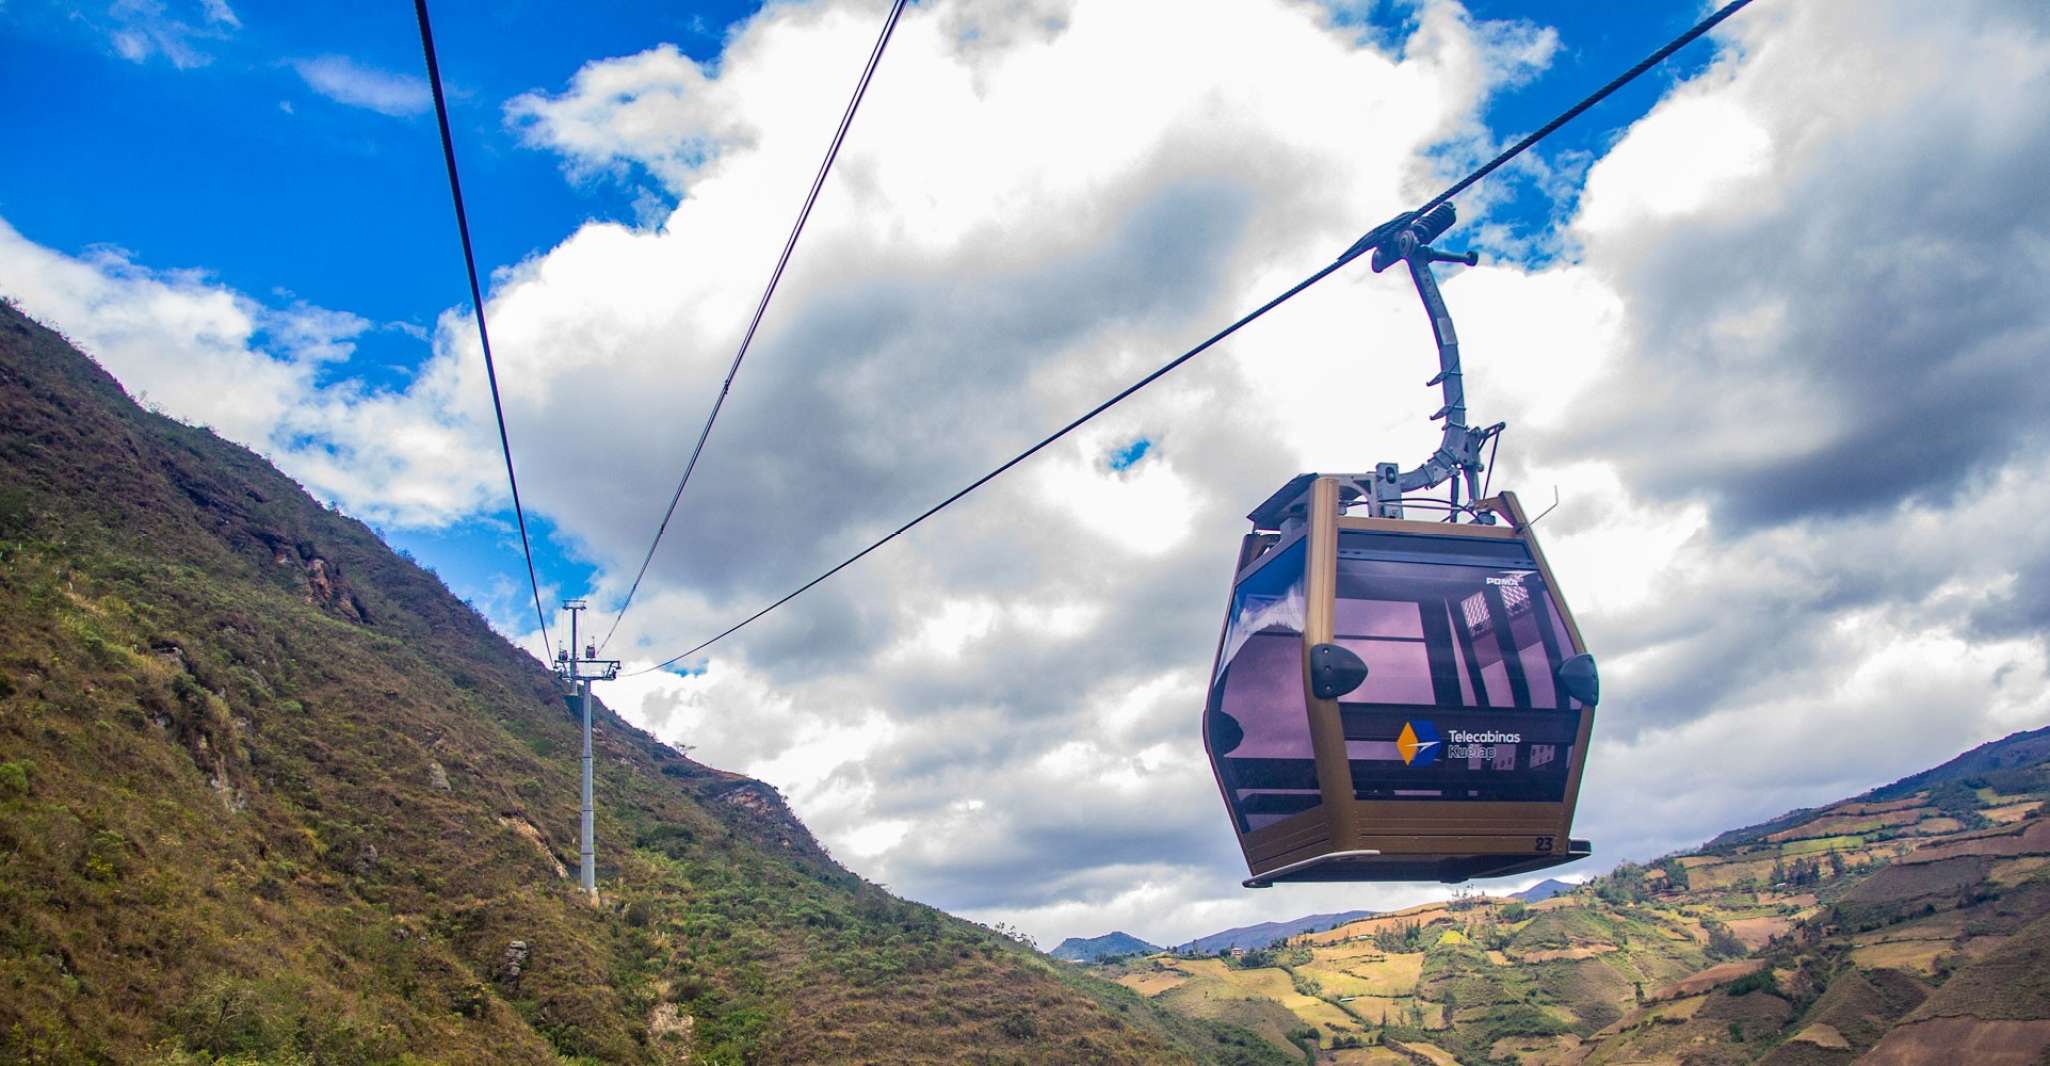 Chachapoyas, Llaqta of Kuelap , Cable Car - Housity